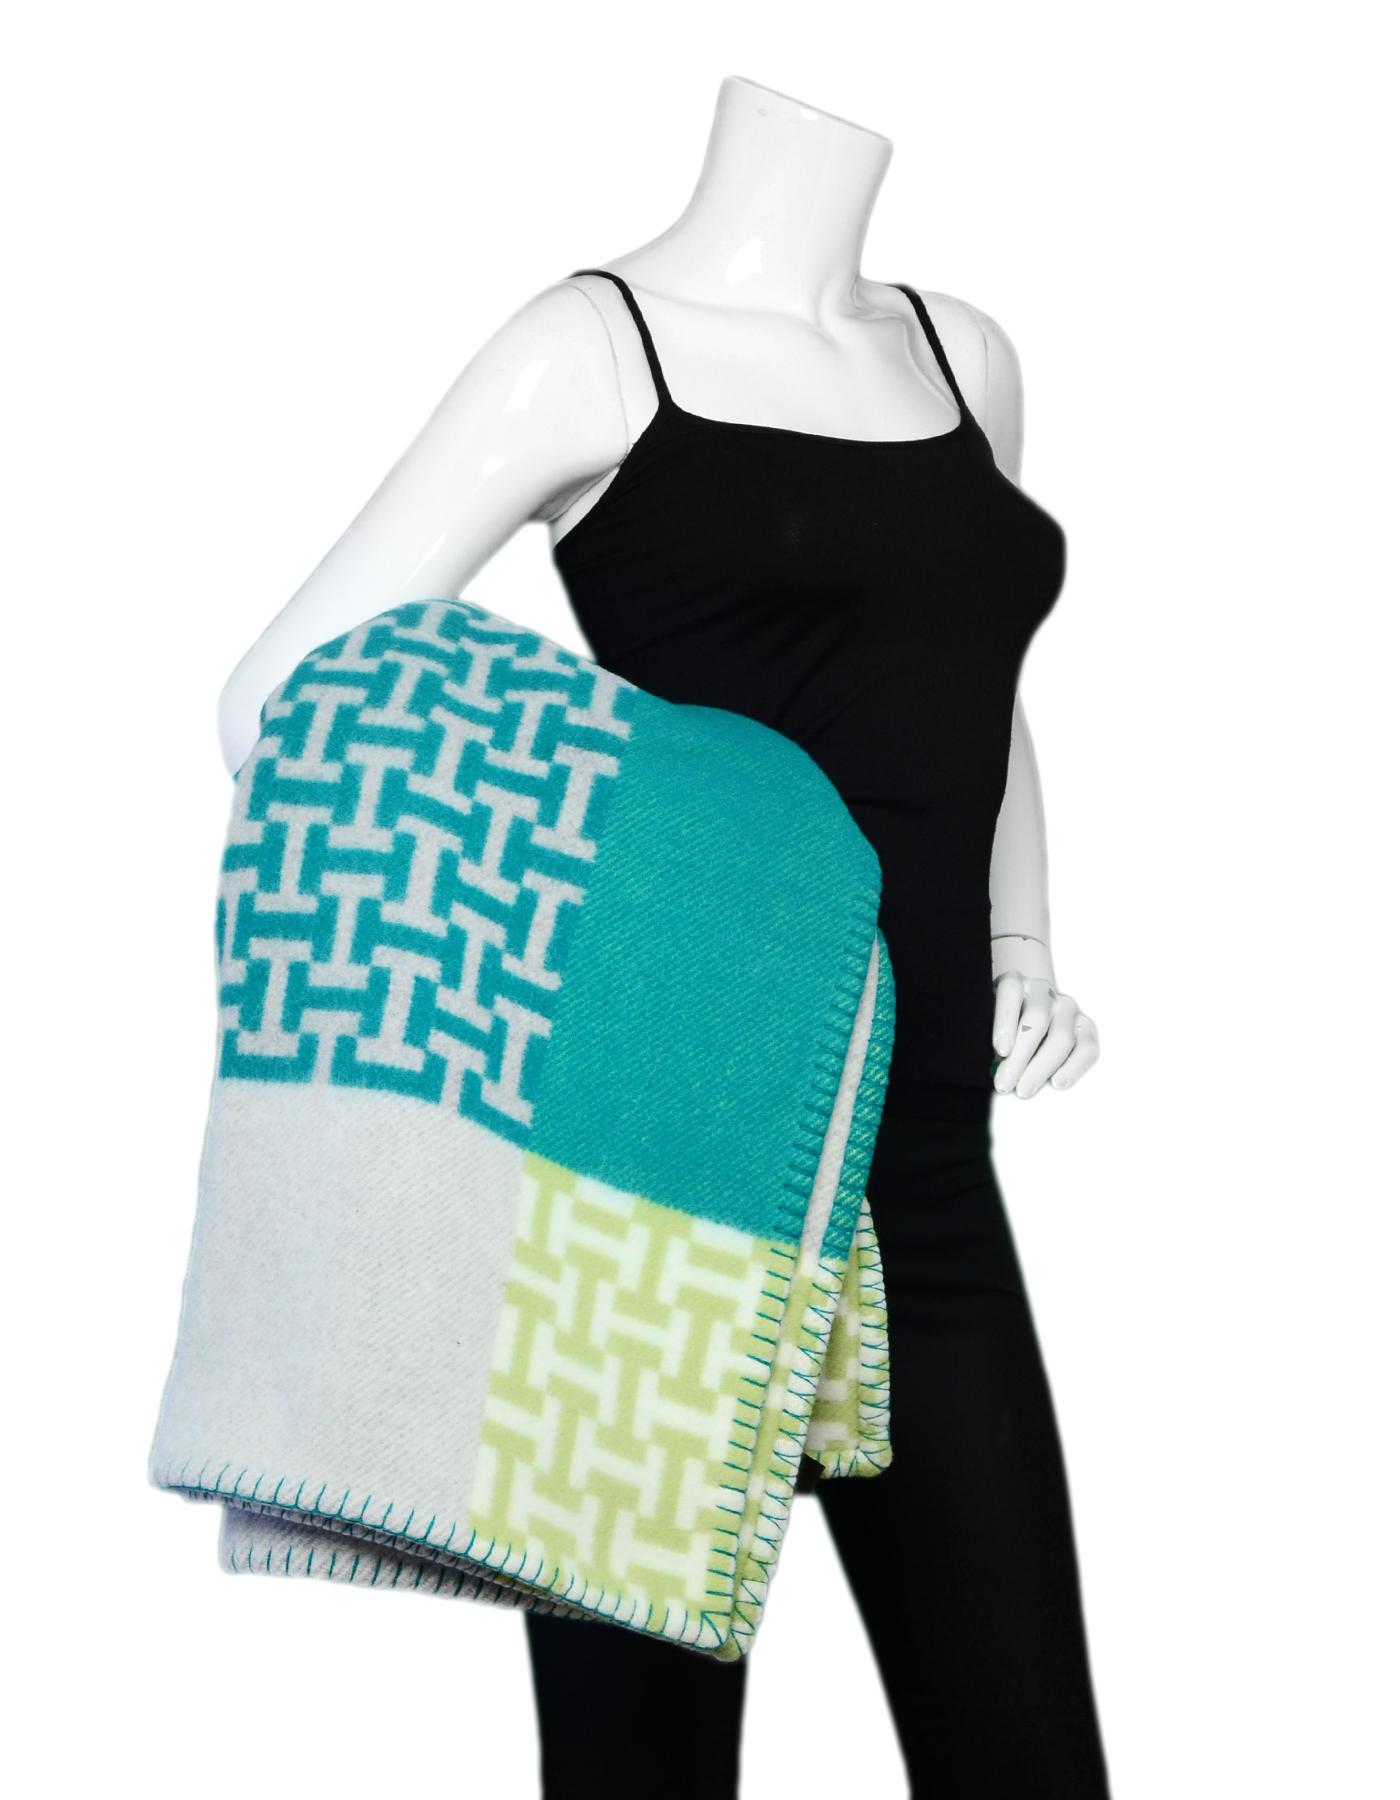 Hermes Aloe Vera Green Avalon Terre d'H Wool & Cashmere Throw Blanket

Made In: Great Britain
Color: Green, grey
Materials: 90% wool, 10% cashmere
Overall Condition: New
Estimated Retail: $1,600 + tax
**Please note that this item was purchased at an